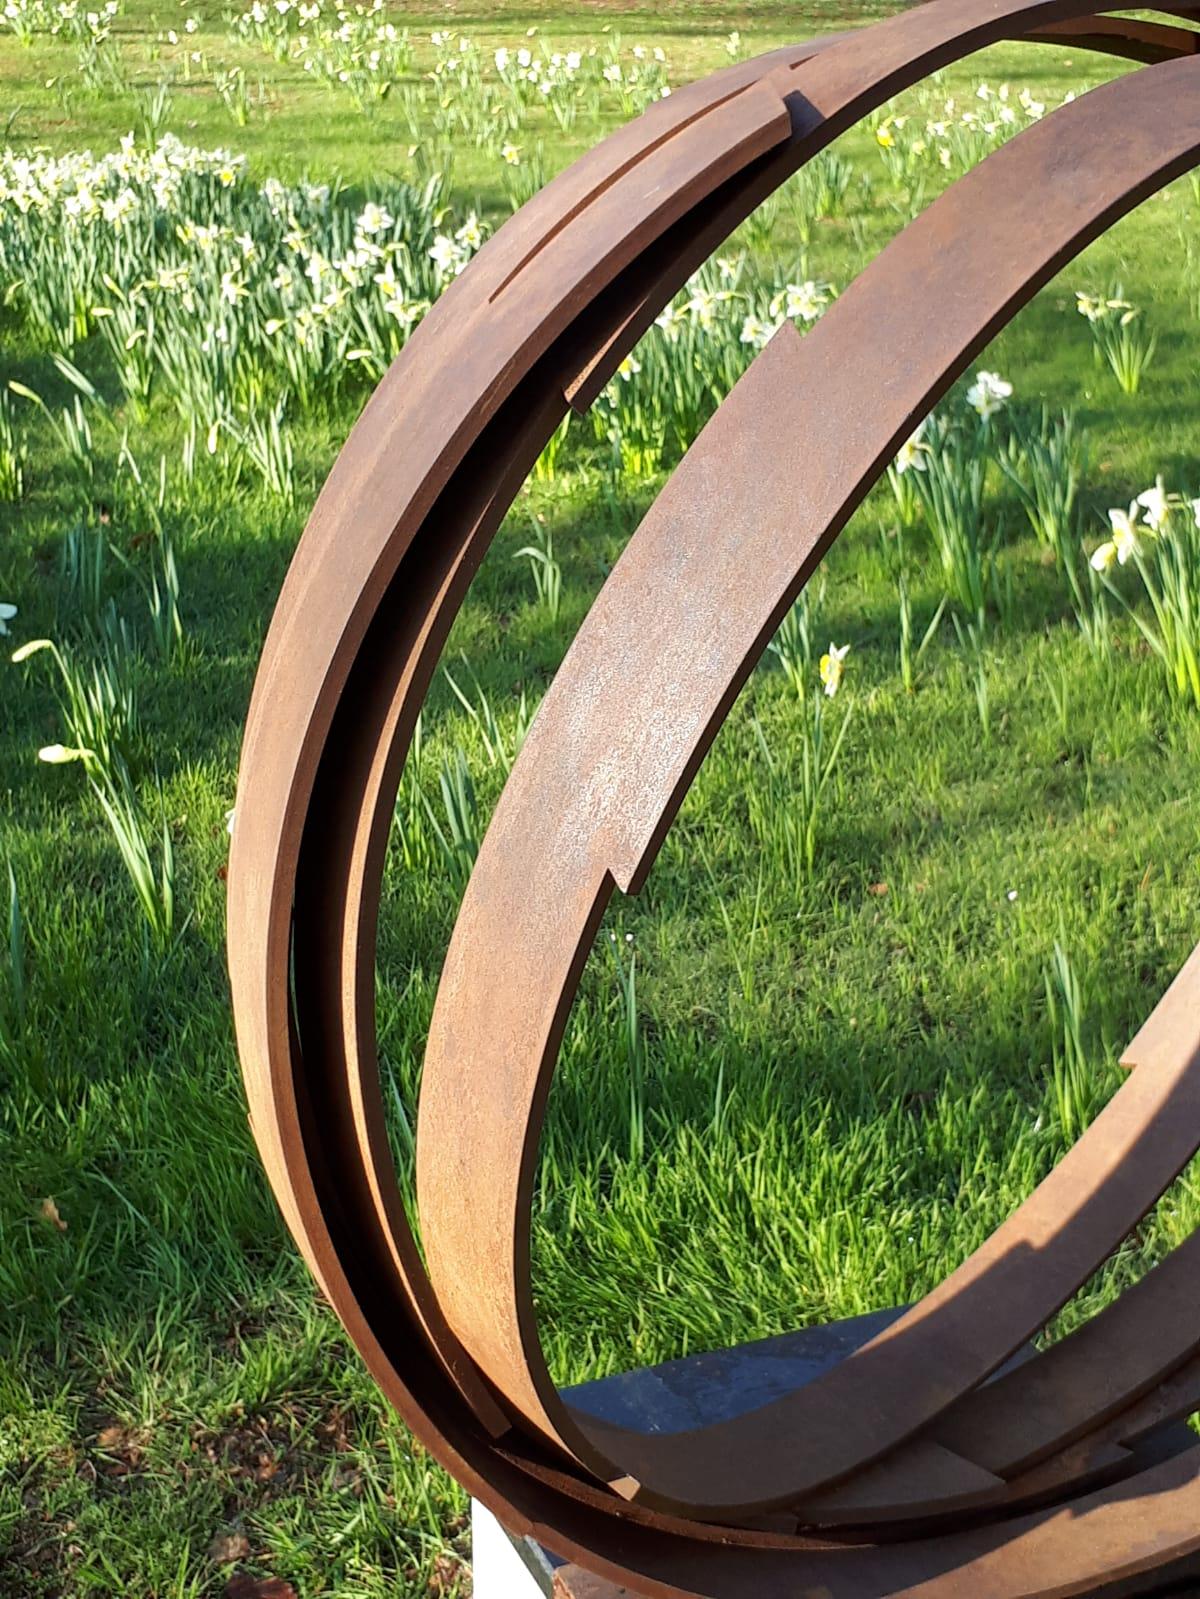 Large Orbit by Kuno Vollet - Contemporary Rusted Steel sculpture for Outdoors For Sale 4